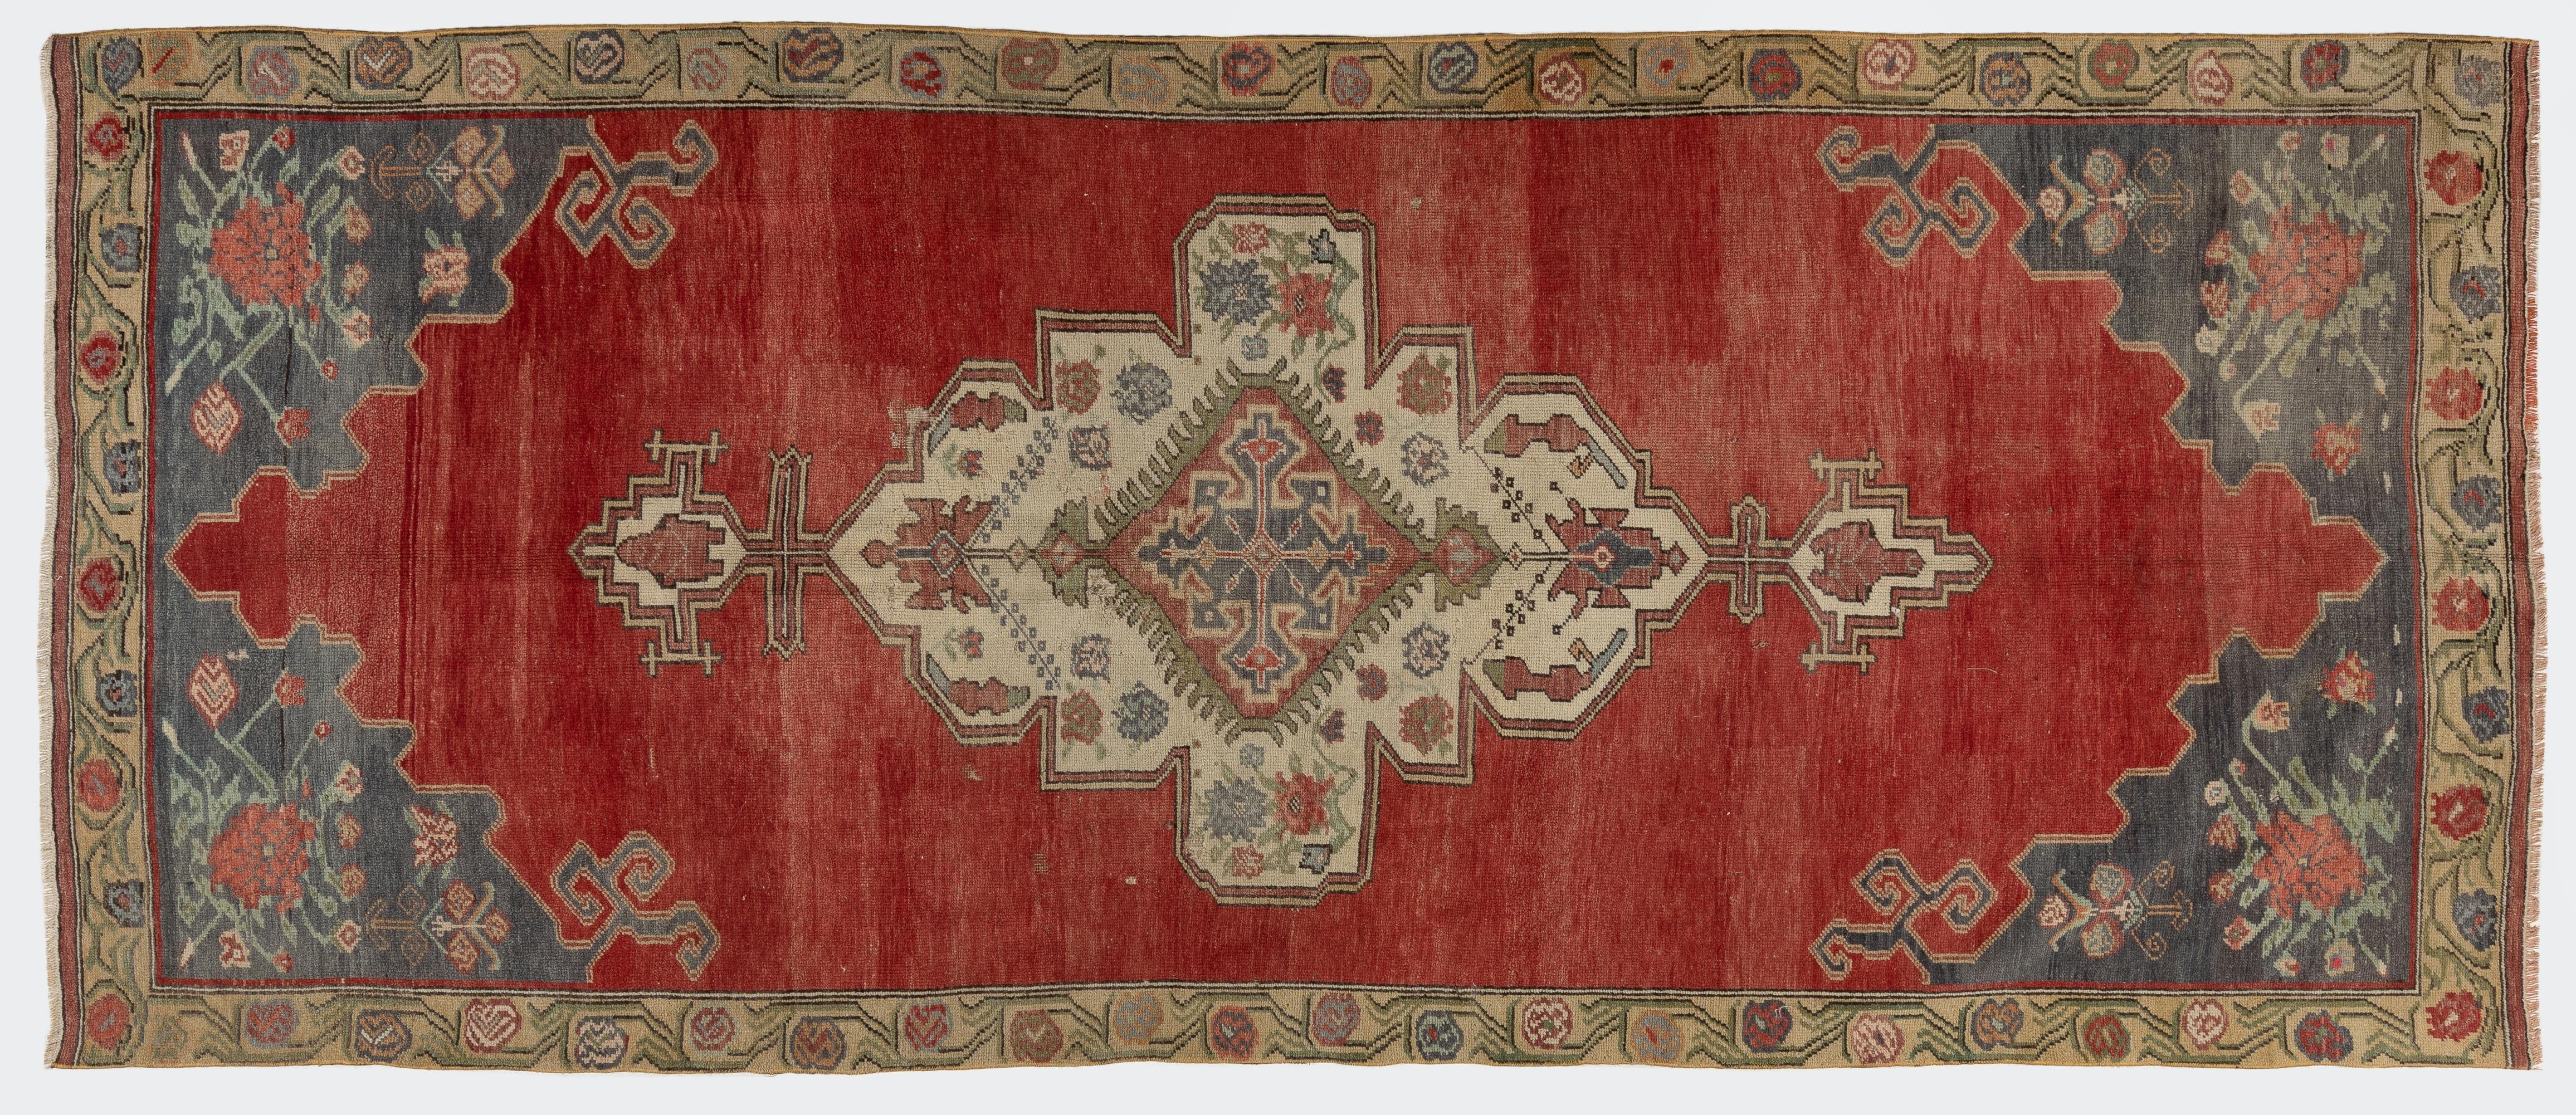 Hand-Knotted 4.6x11 Ft Vintage Handmade Central Anatolian Rug, Traditional Wool Carpet in Red For Sale